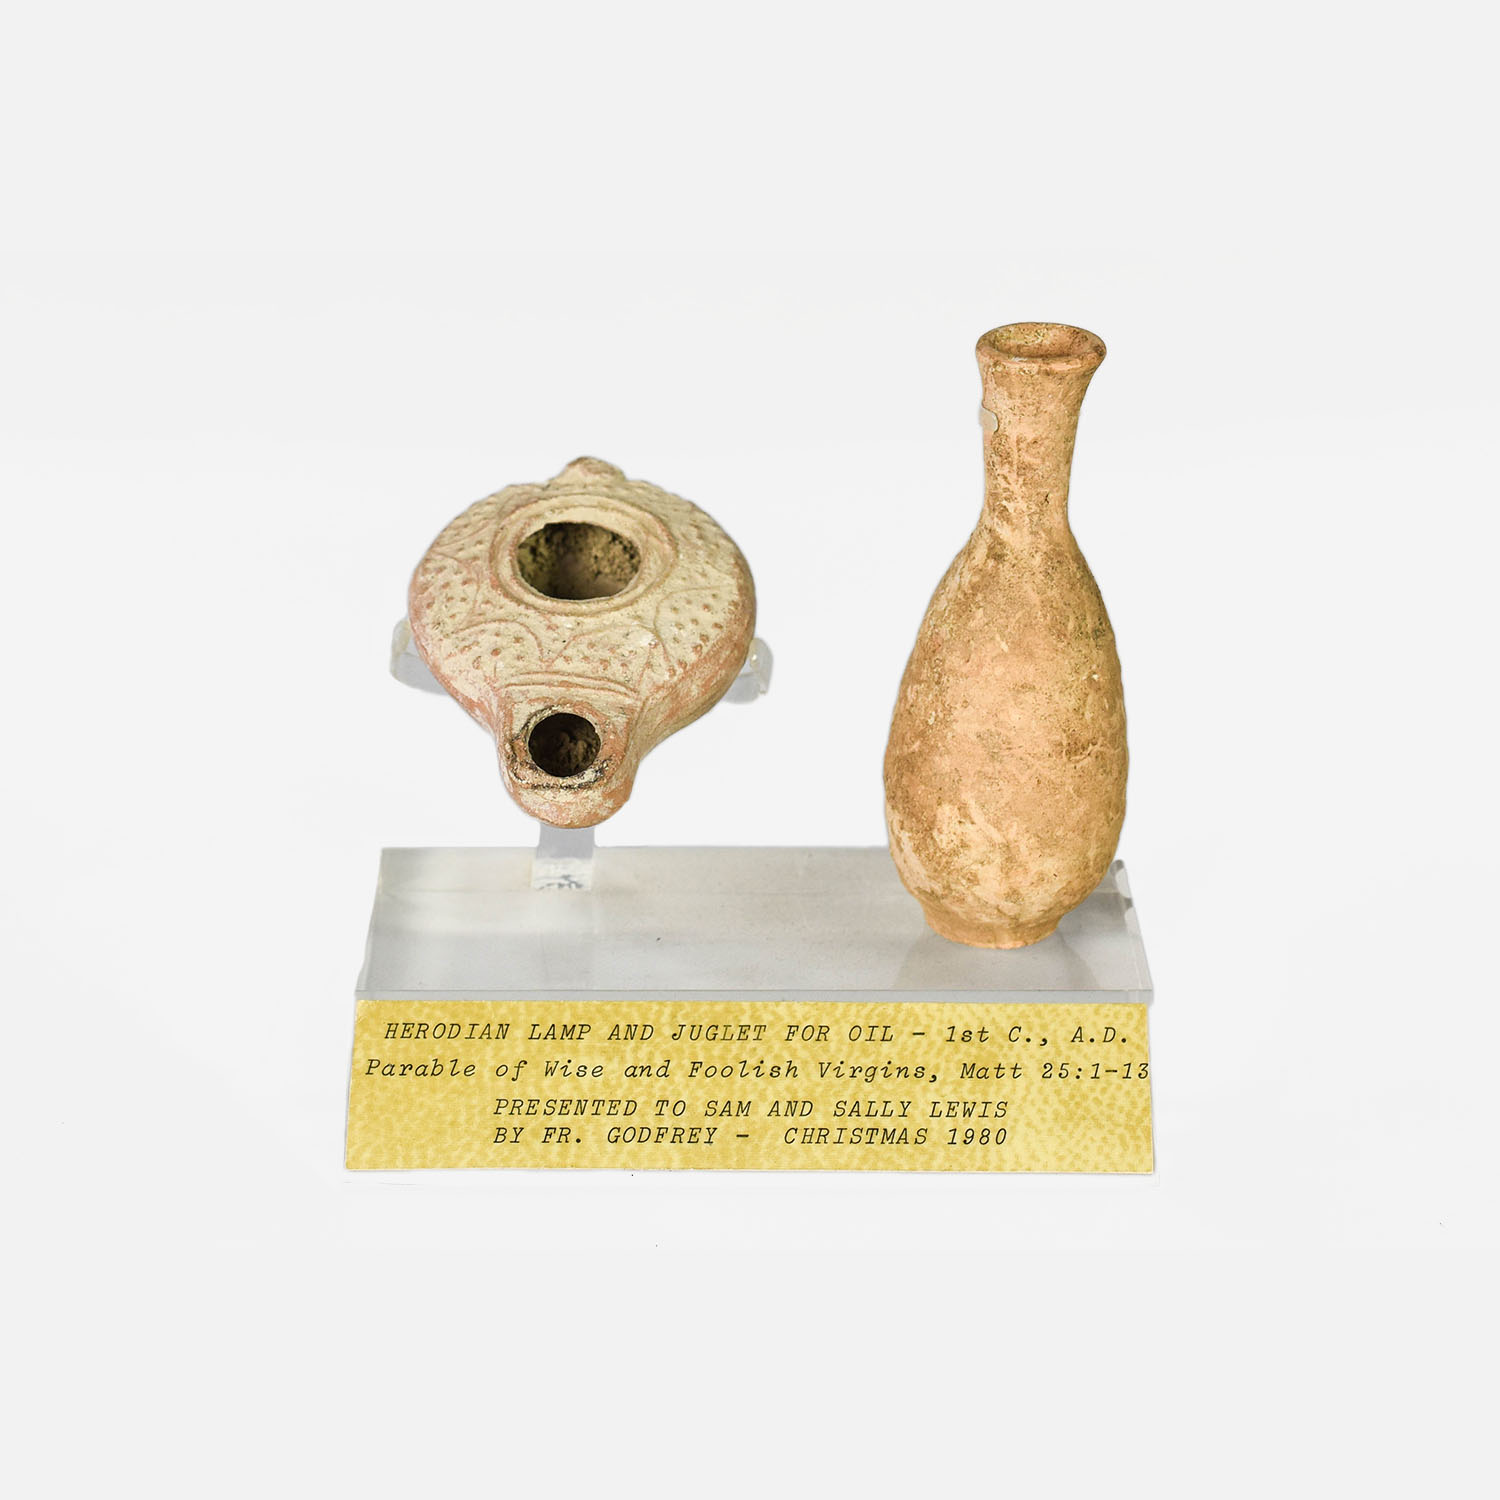 Ancient Holy Land Herodian Oil Lamp and Juglet